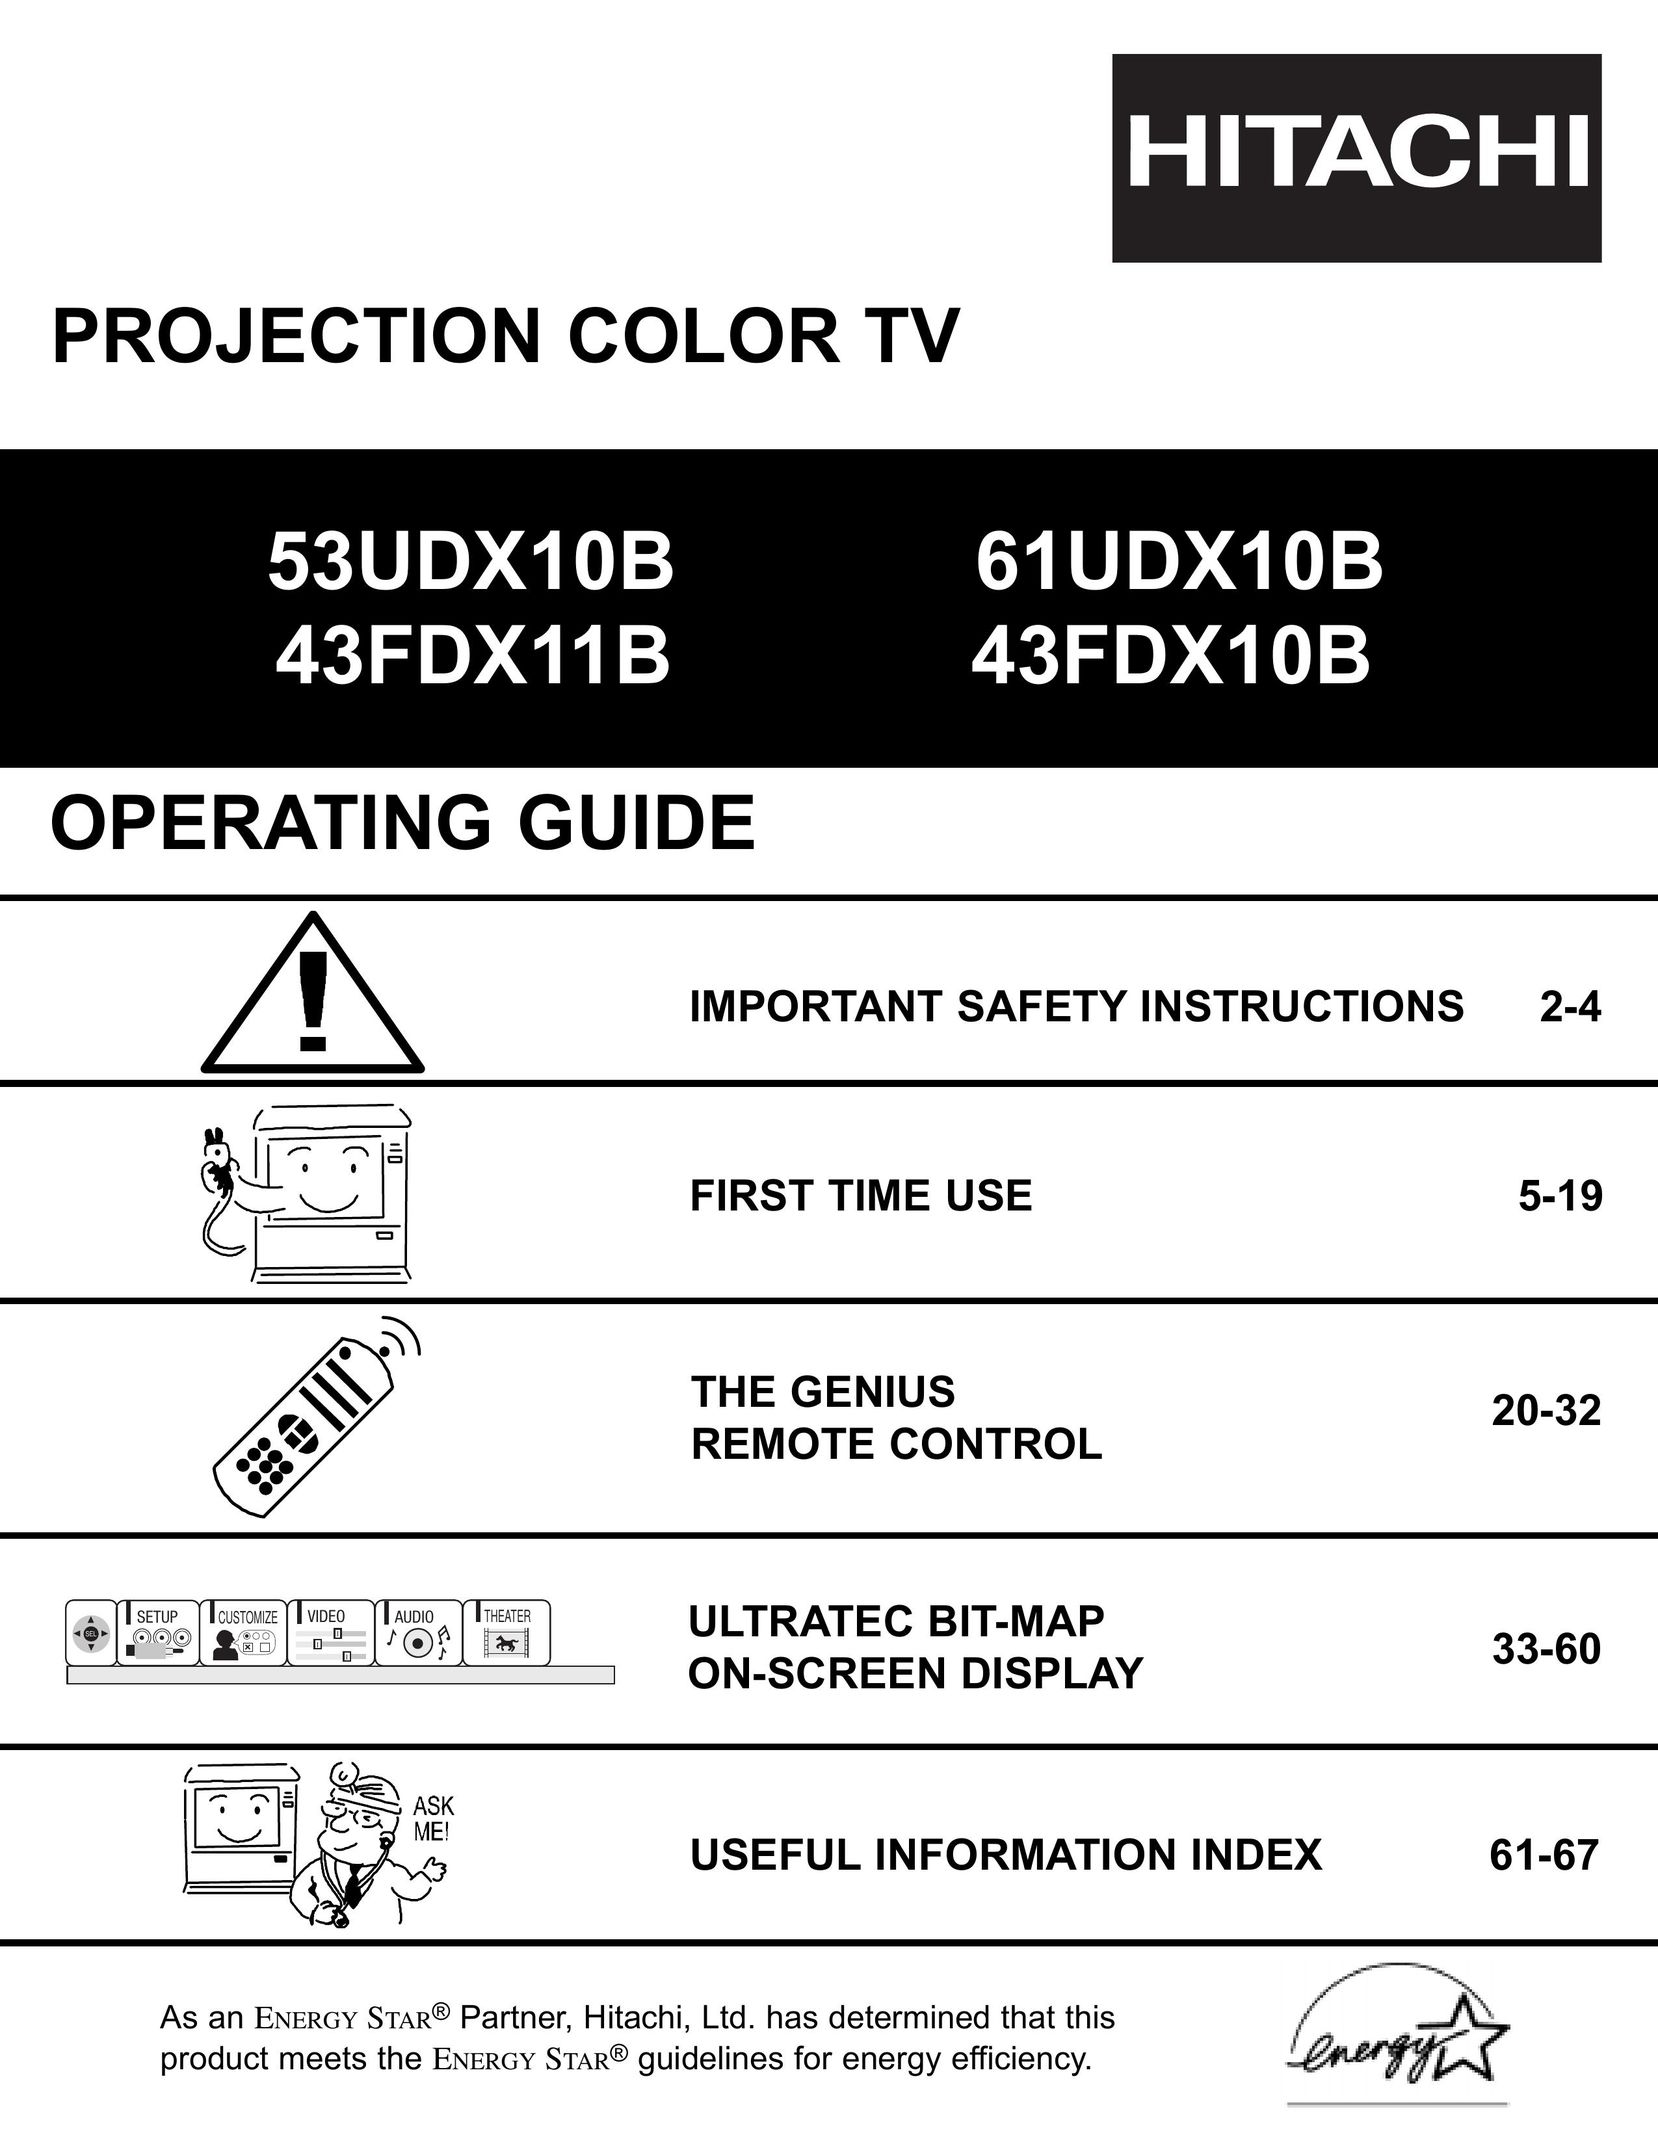 Ultratec 53UDX10B Projection Television User Manual